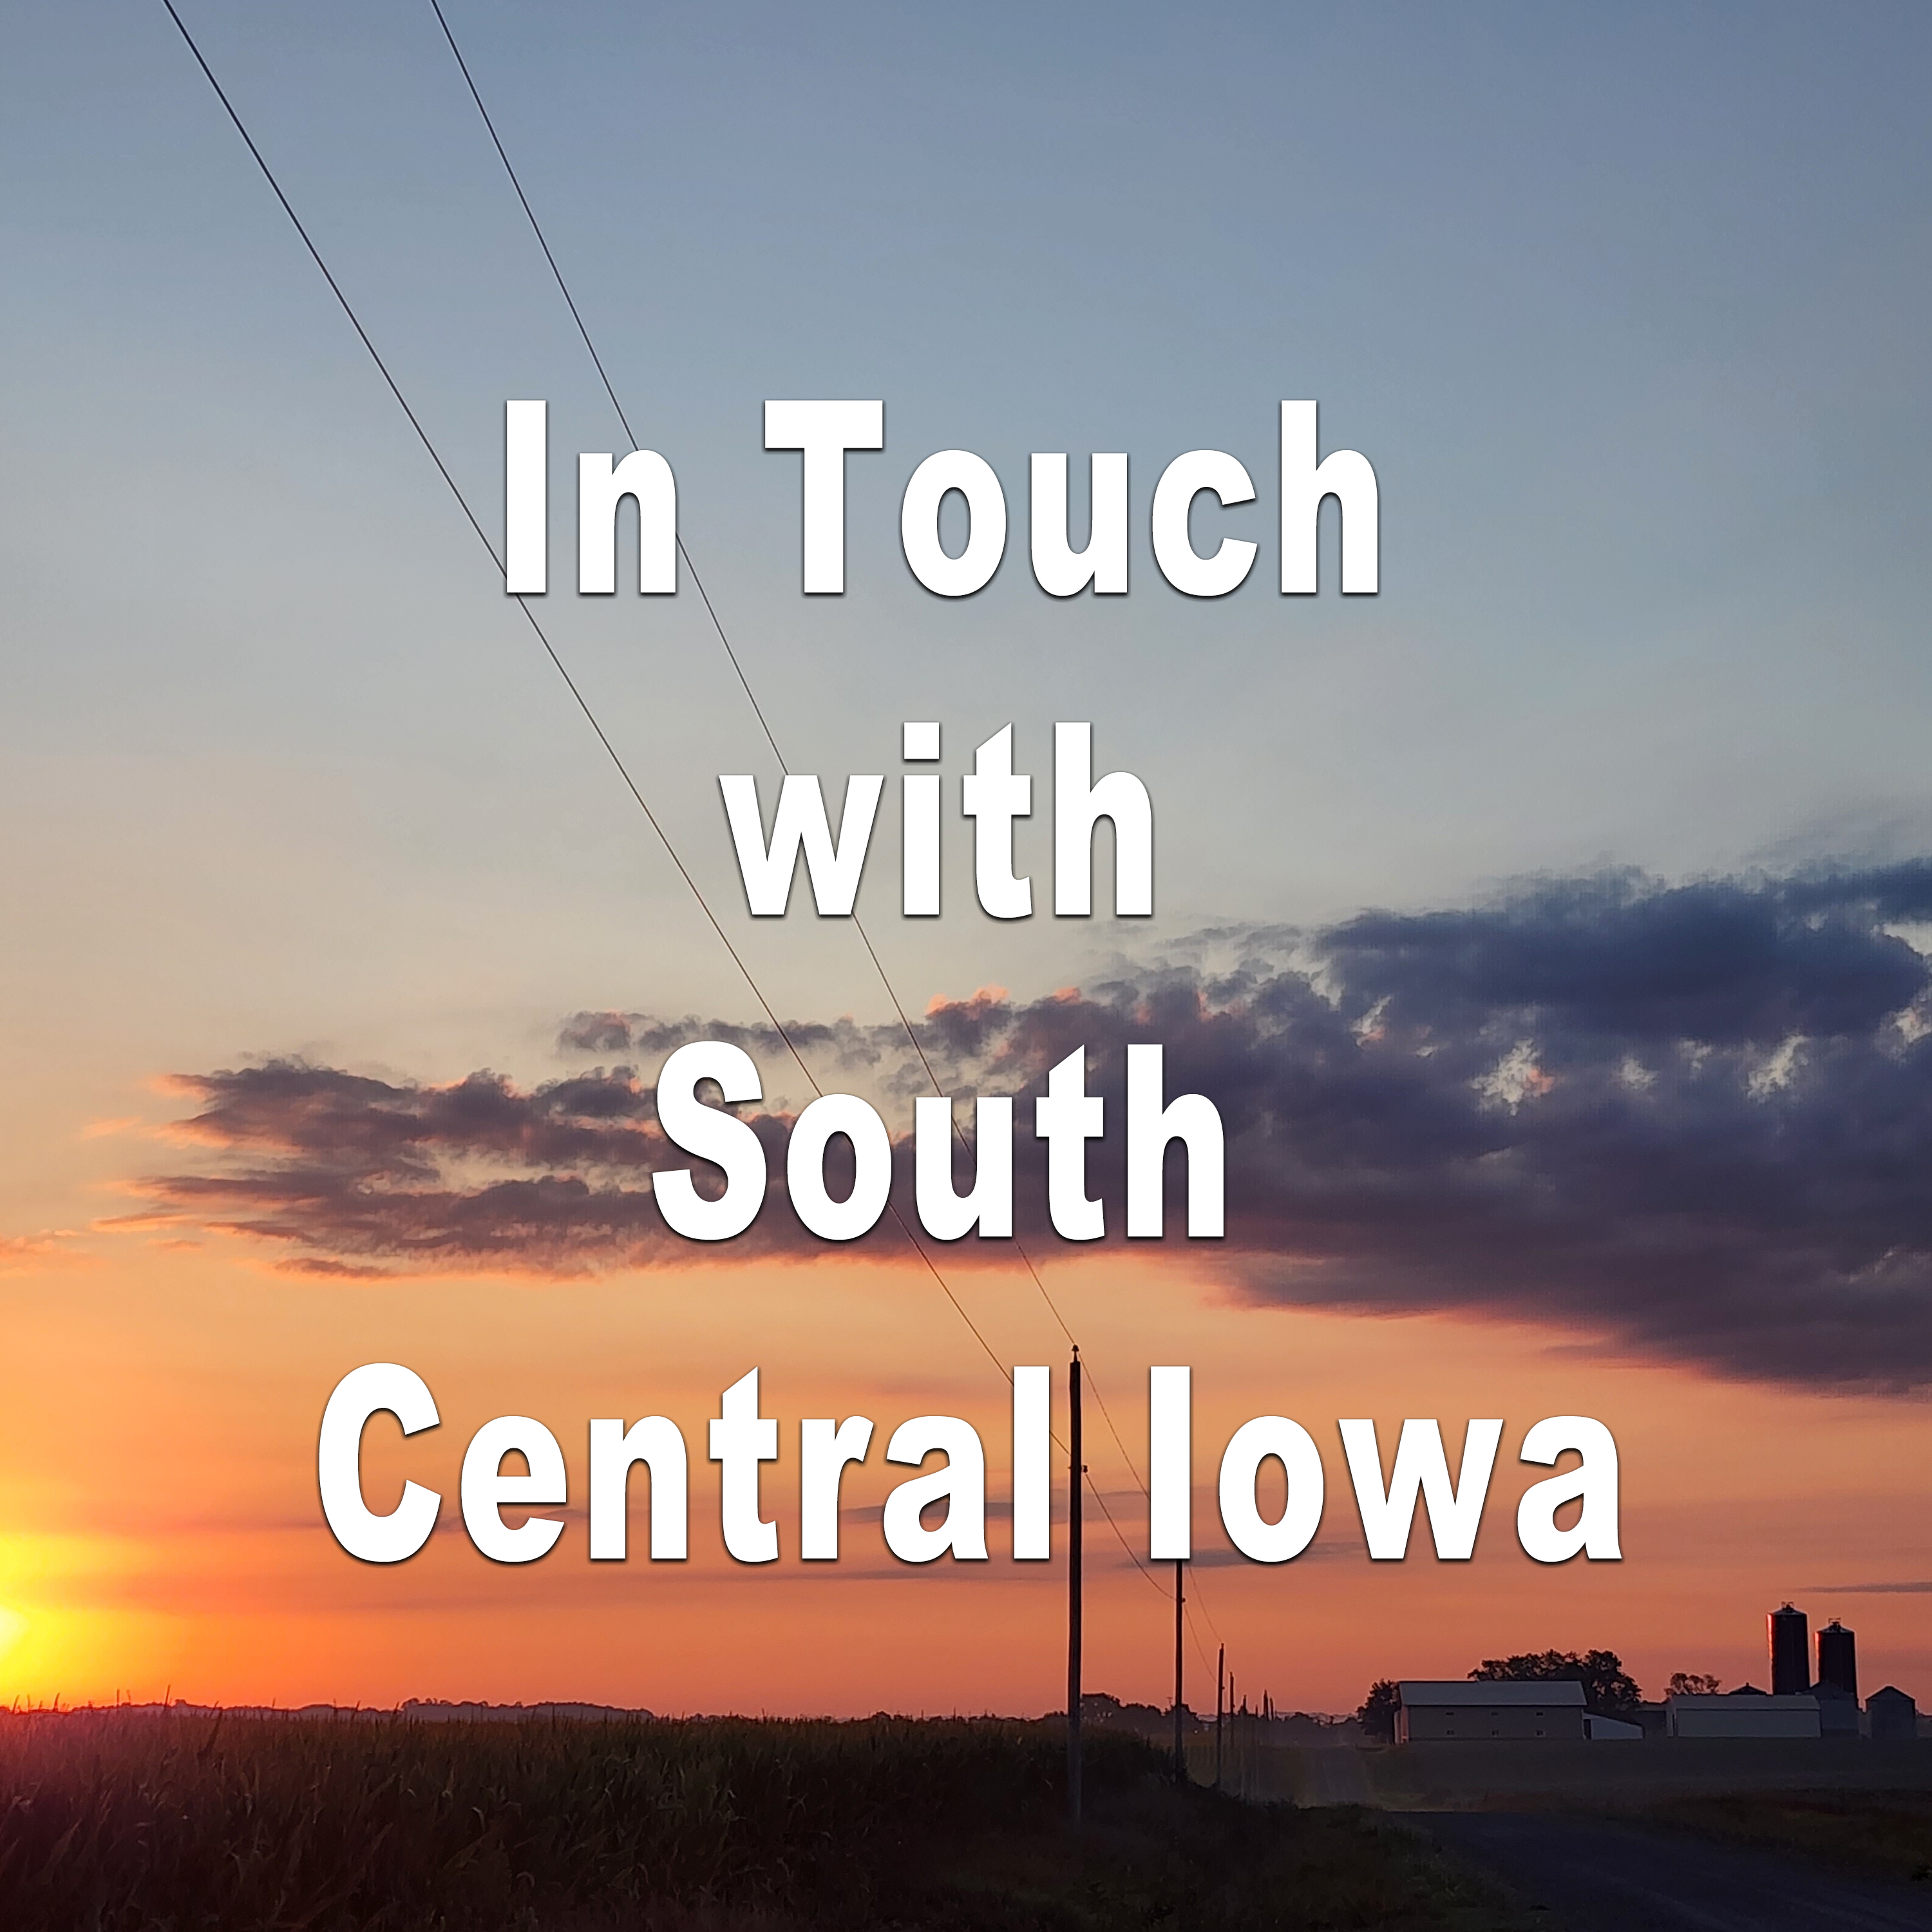 In Touch with South Central Iowa